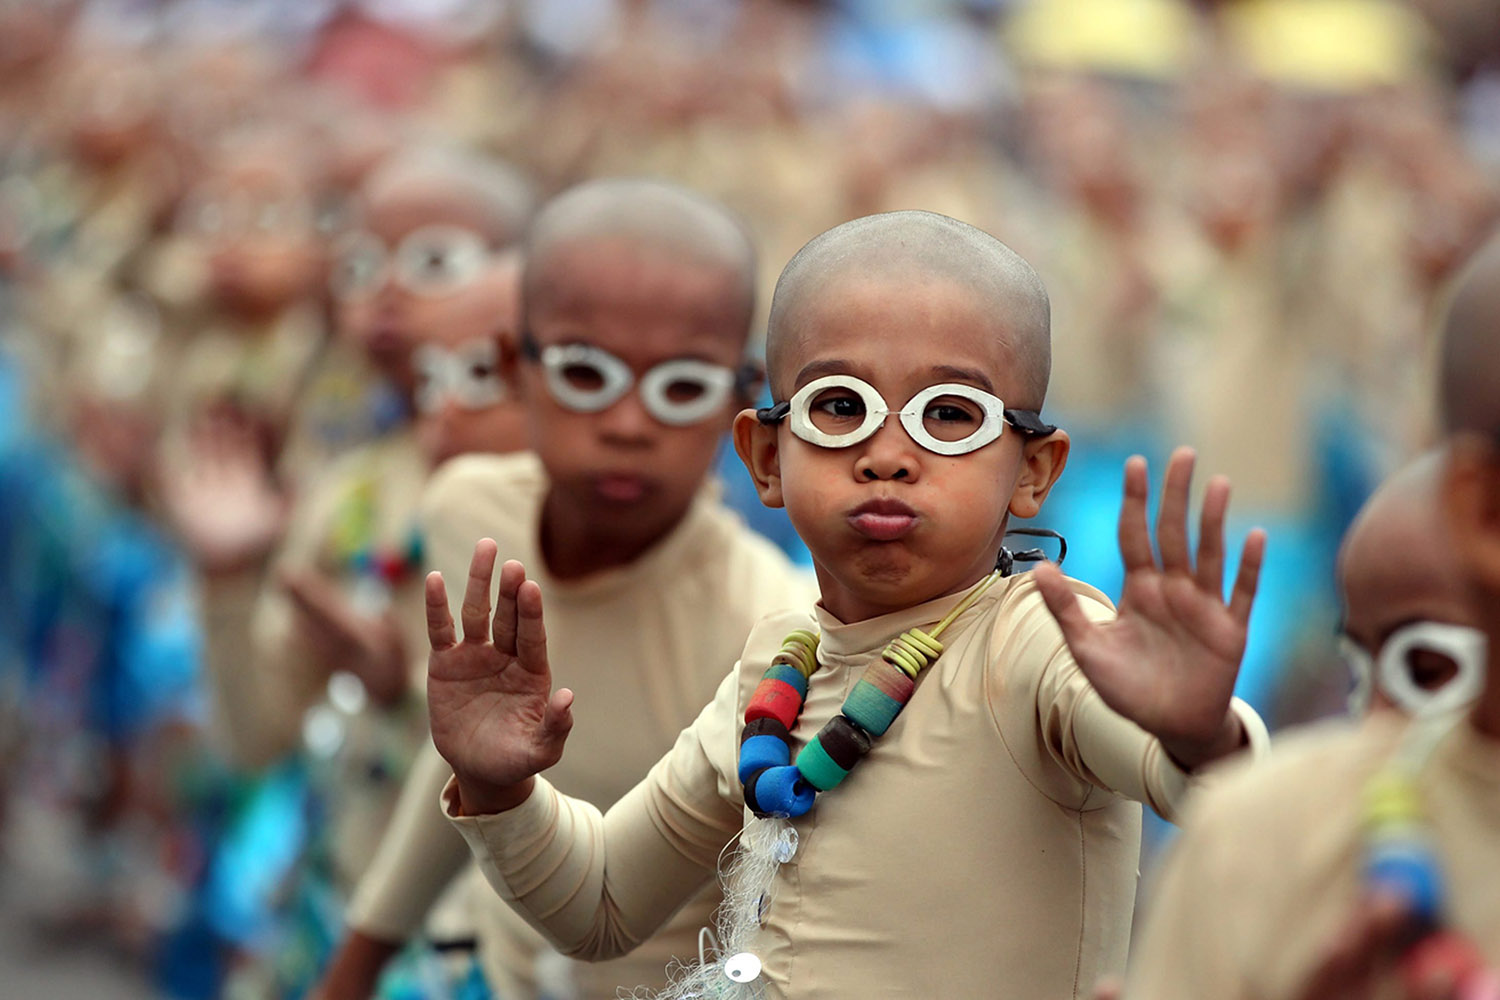 Jan. 19, 2014. Filipinos students, wearing costumes, perform during a cultural presentation marking the feast of Child Jesus in Cebu City, Visayas region, Philippines.